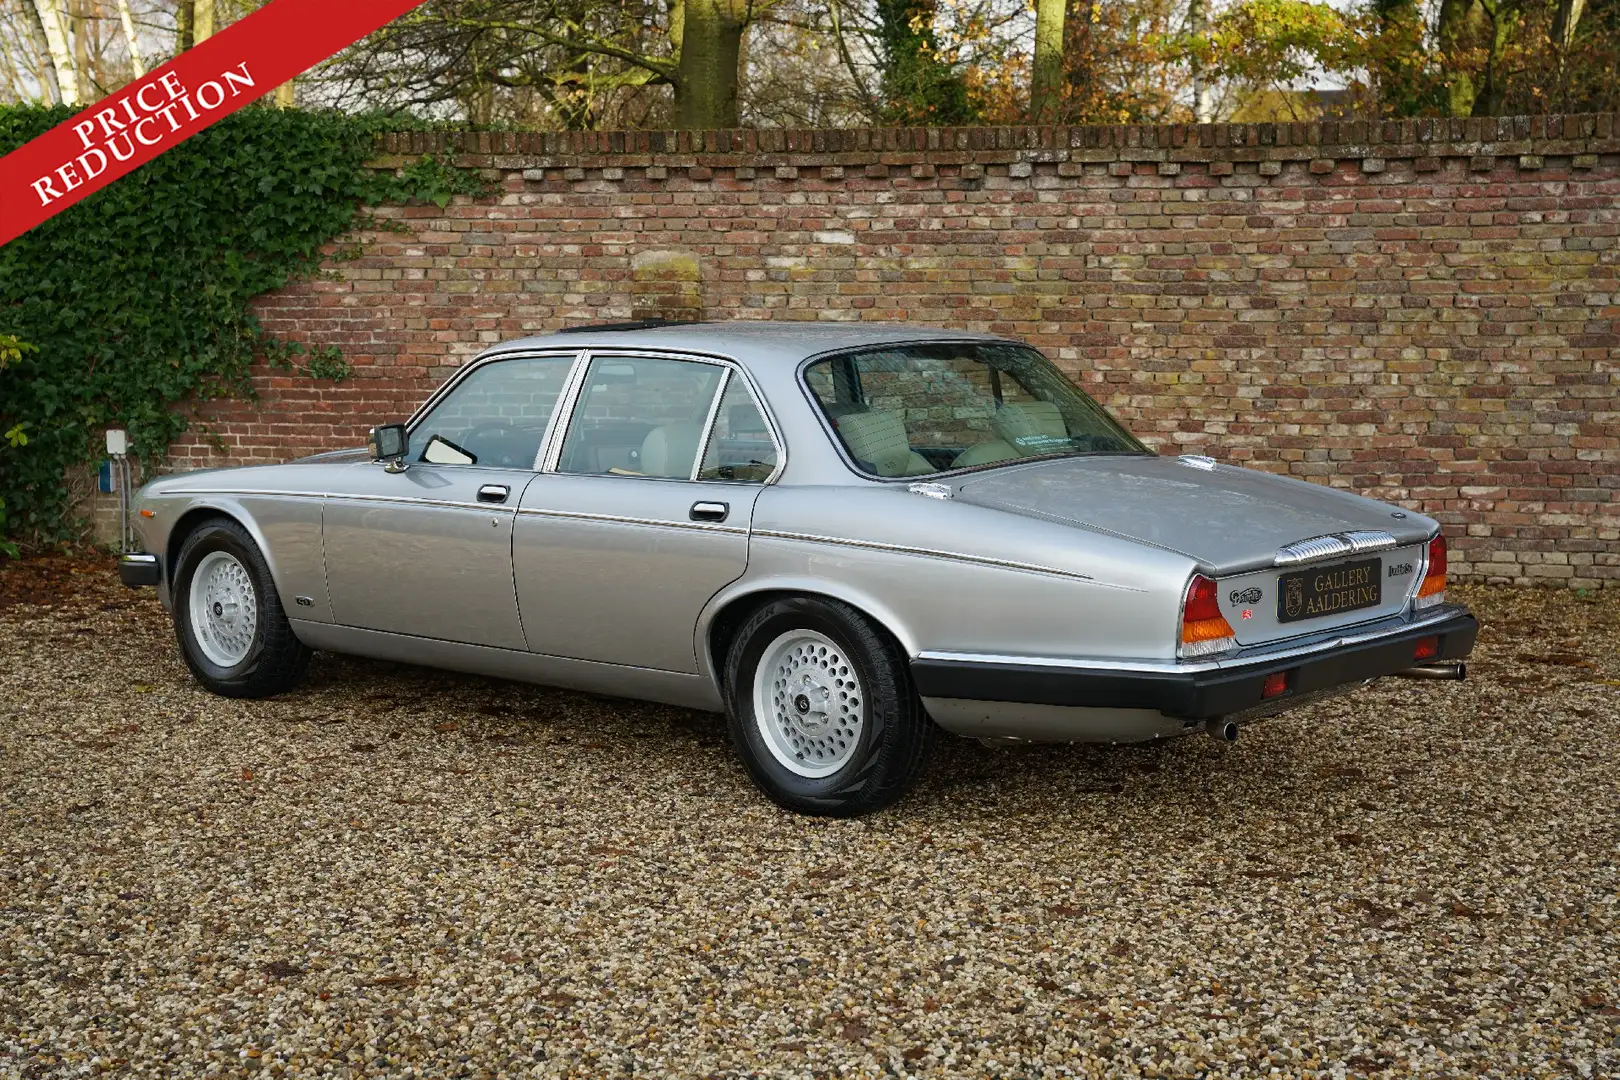 Daimler Double Six PRICE REDUCTION! Solid condition, runs beautifully siva - 2